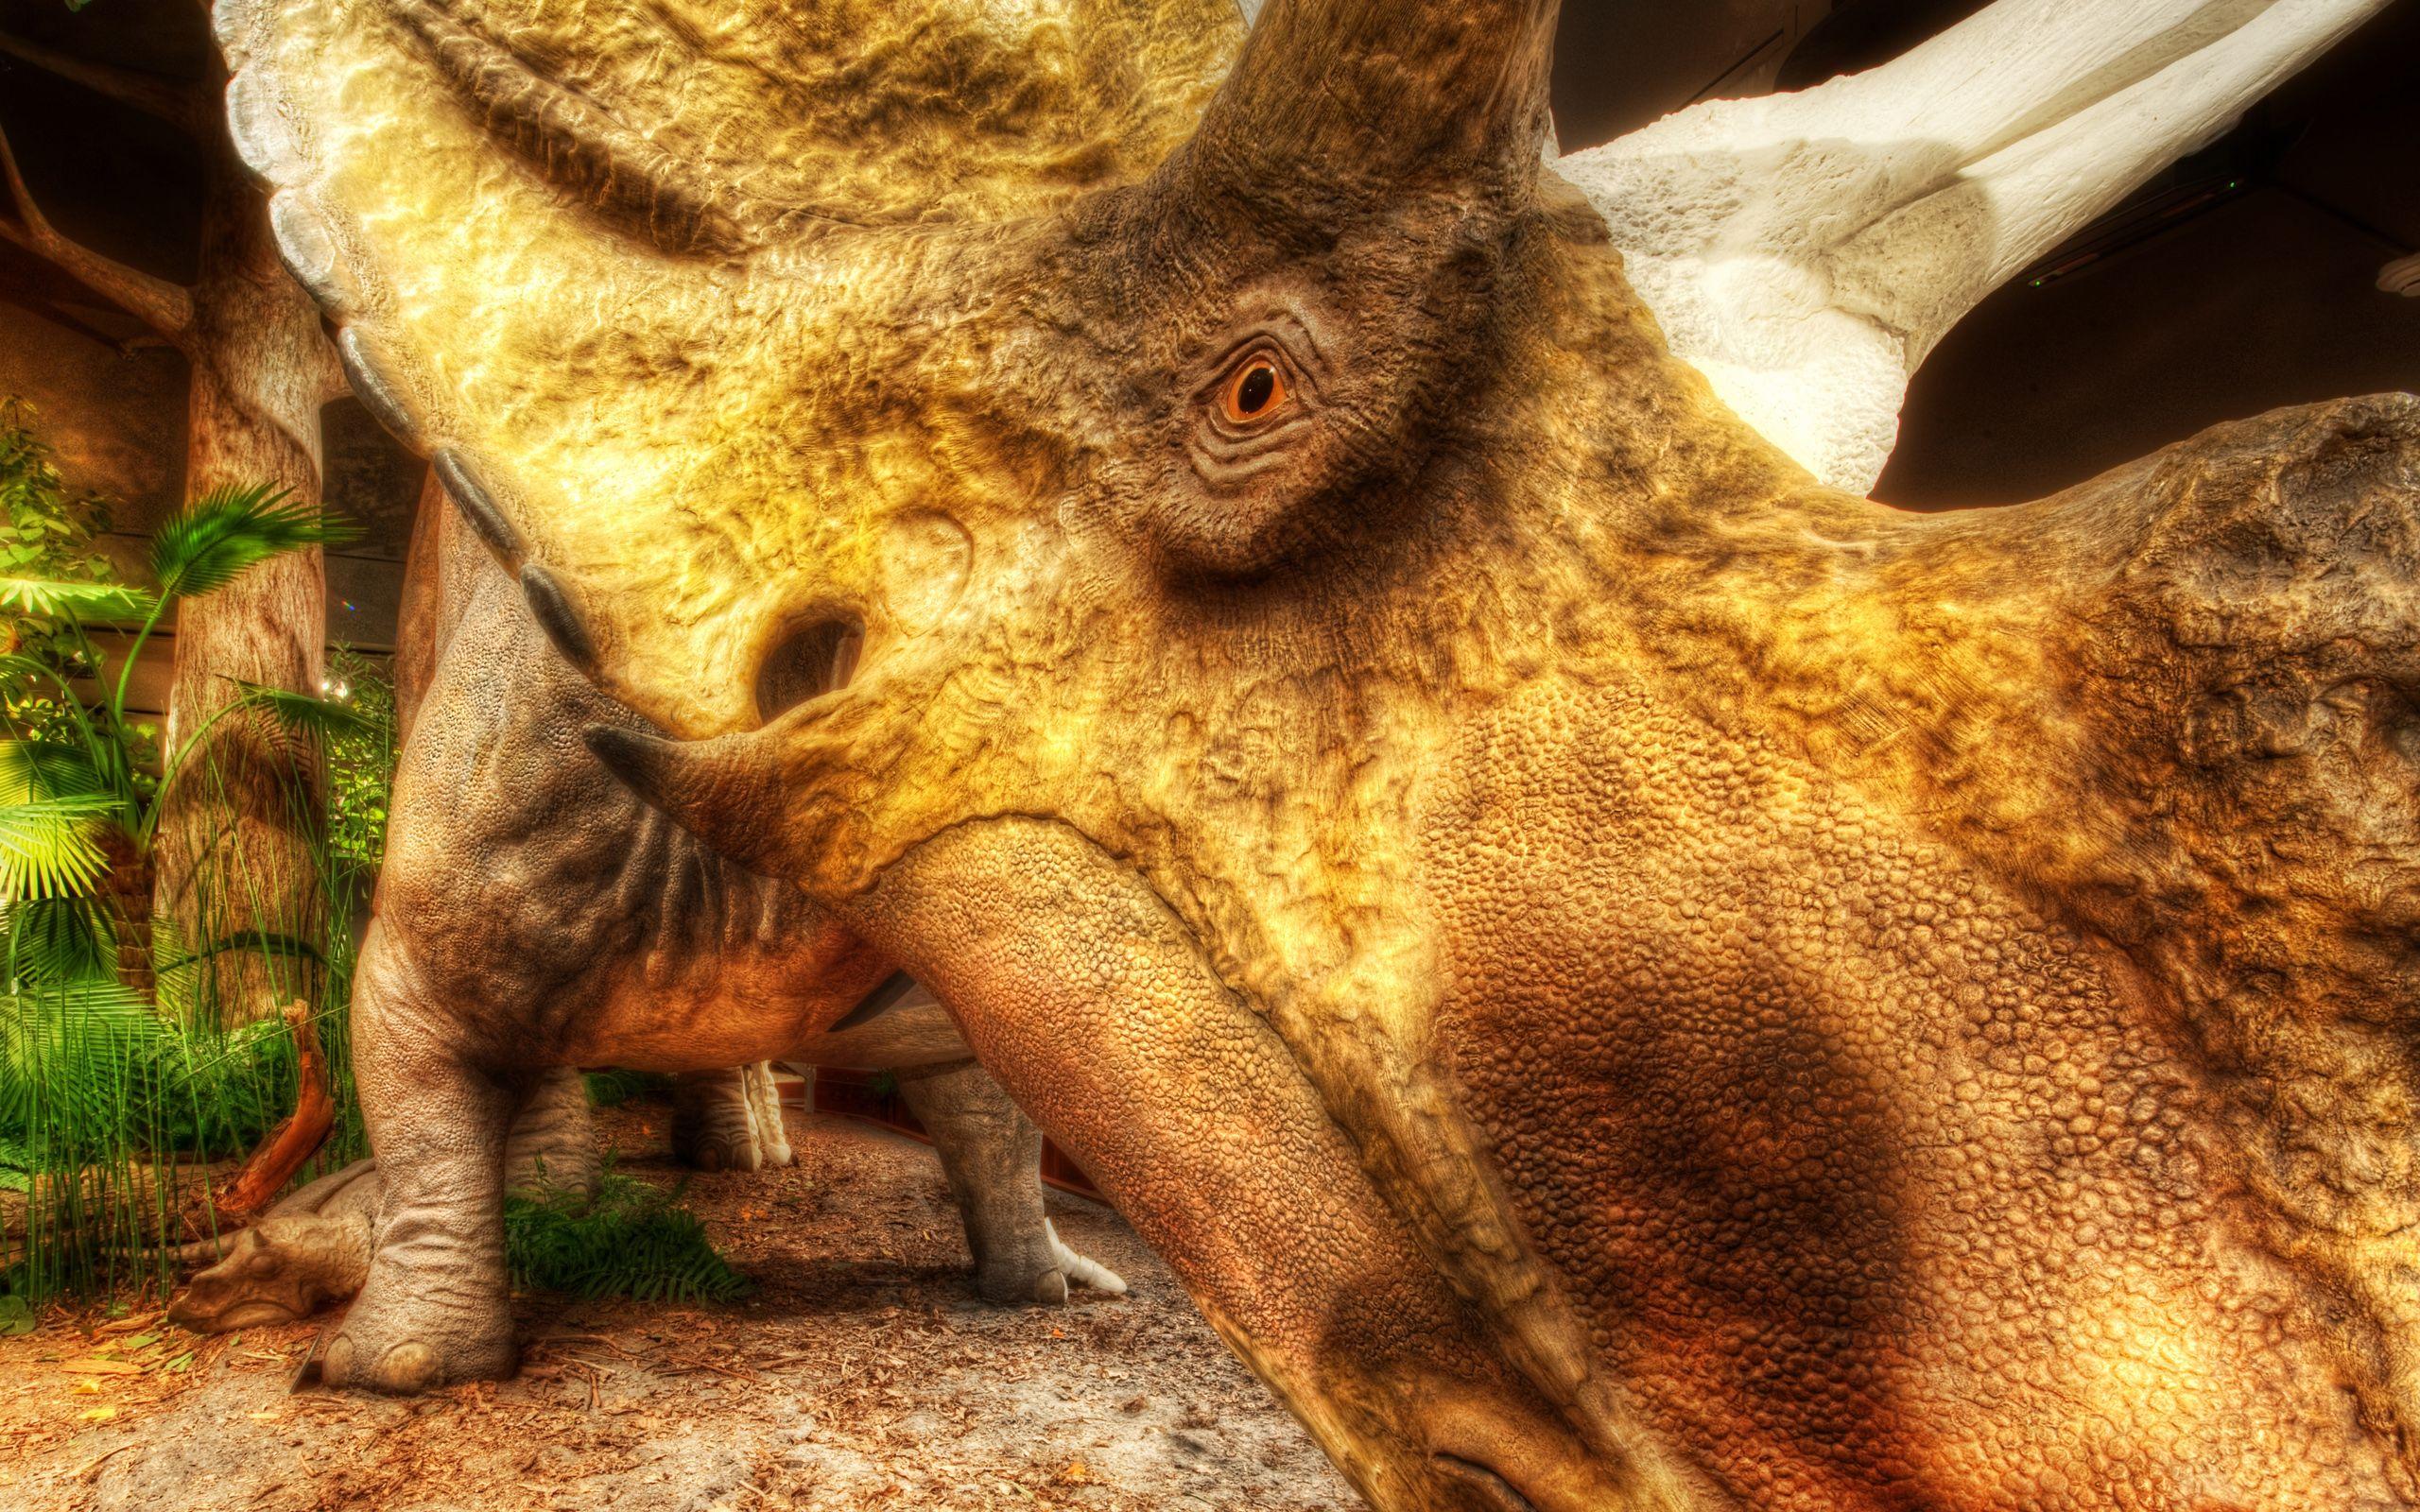 Triceratops at the Museum of the Rockies in Bozeman widescreen